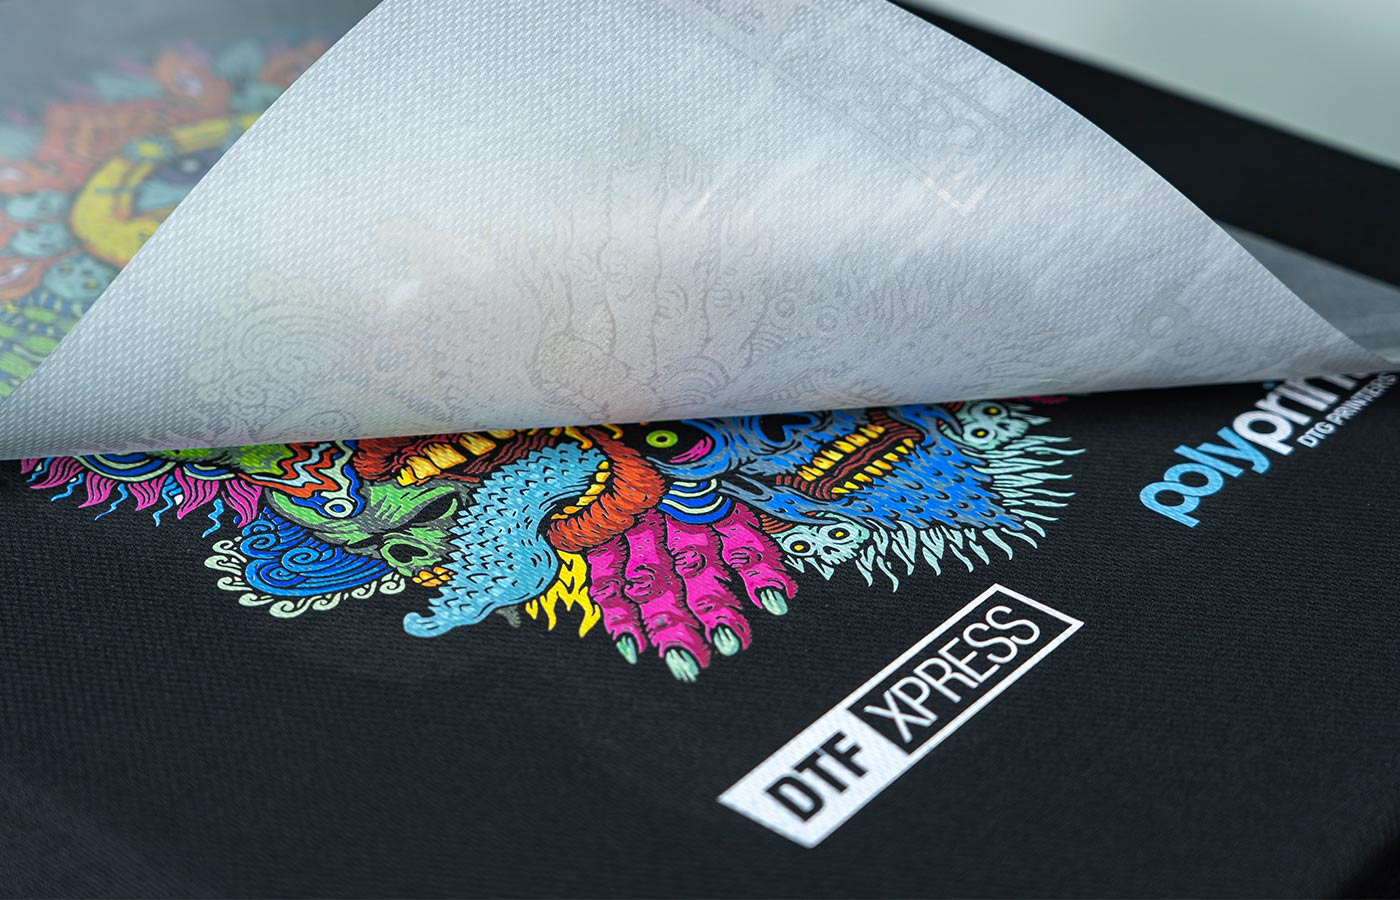 Introducing DTF Xpress for printing direct-to-film textile